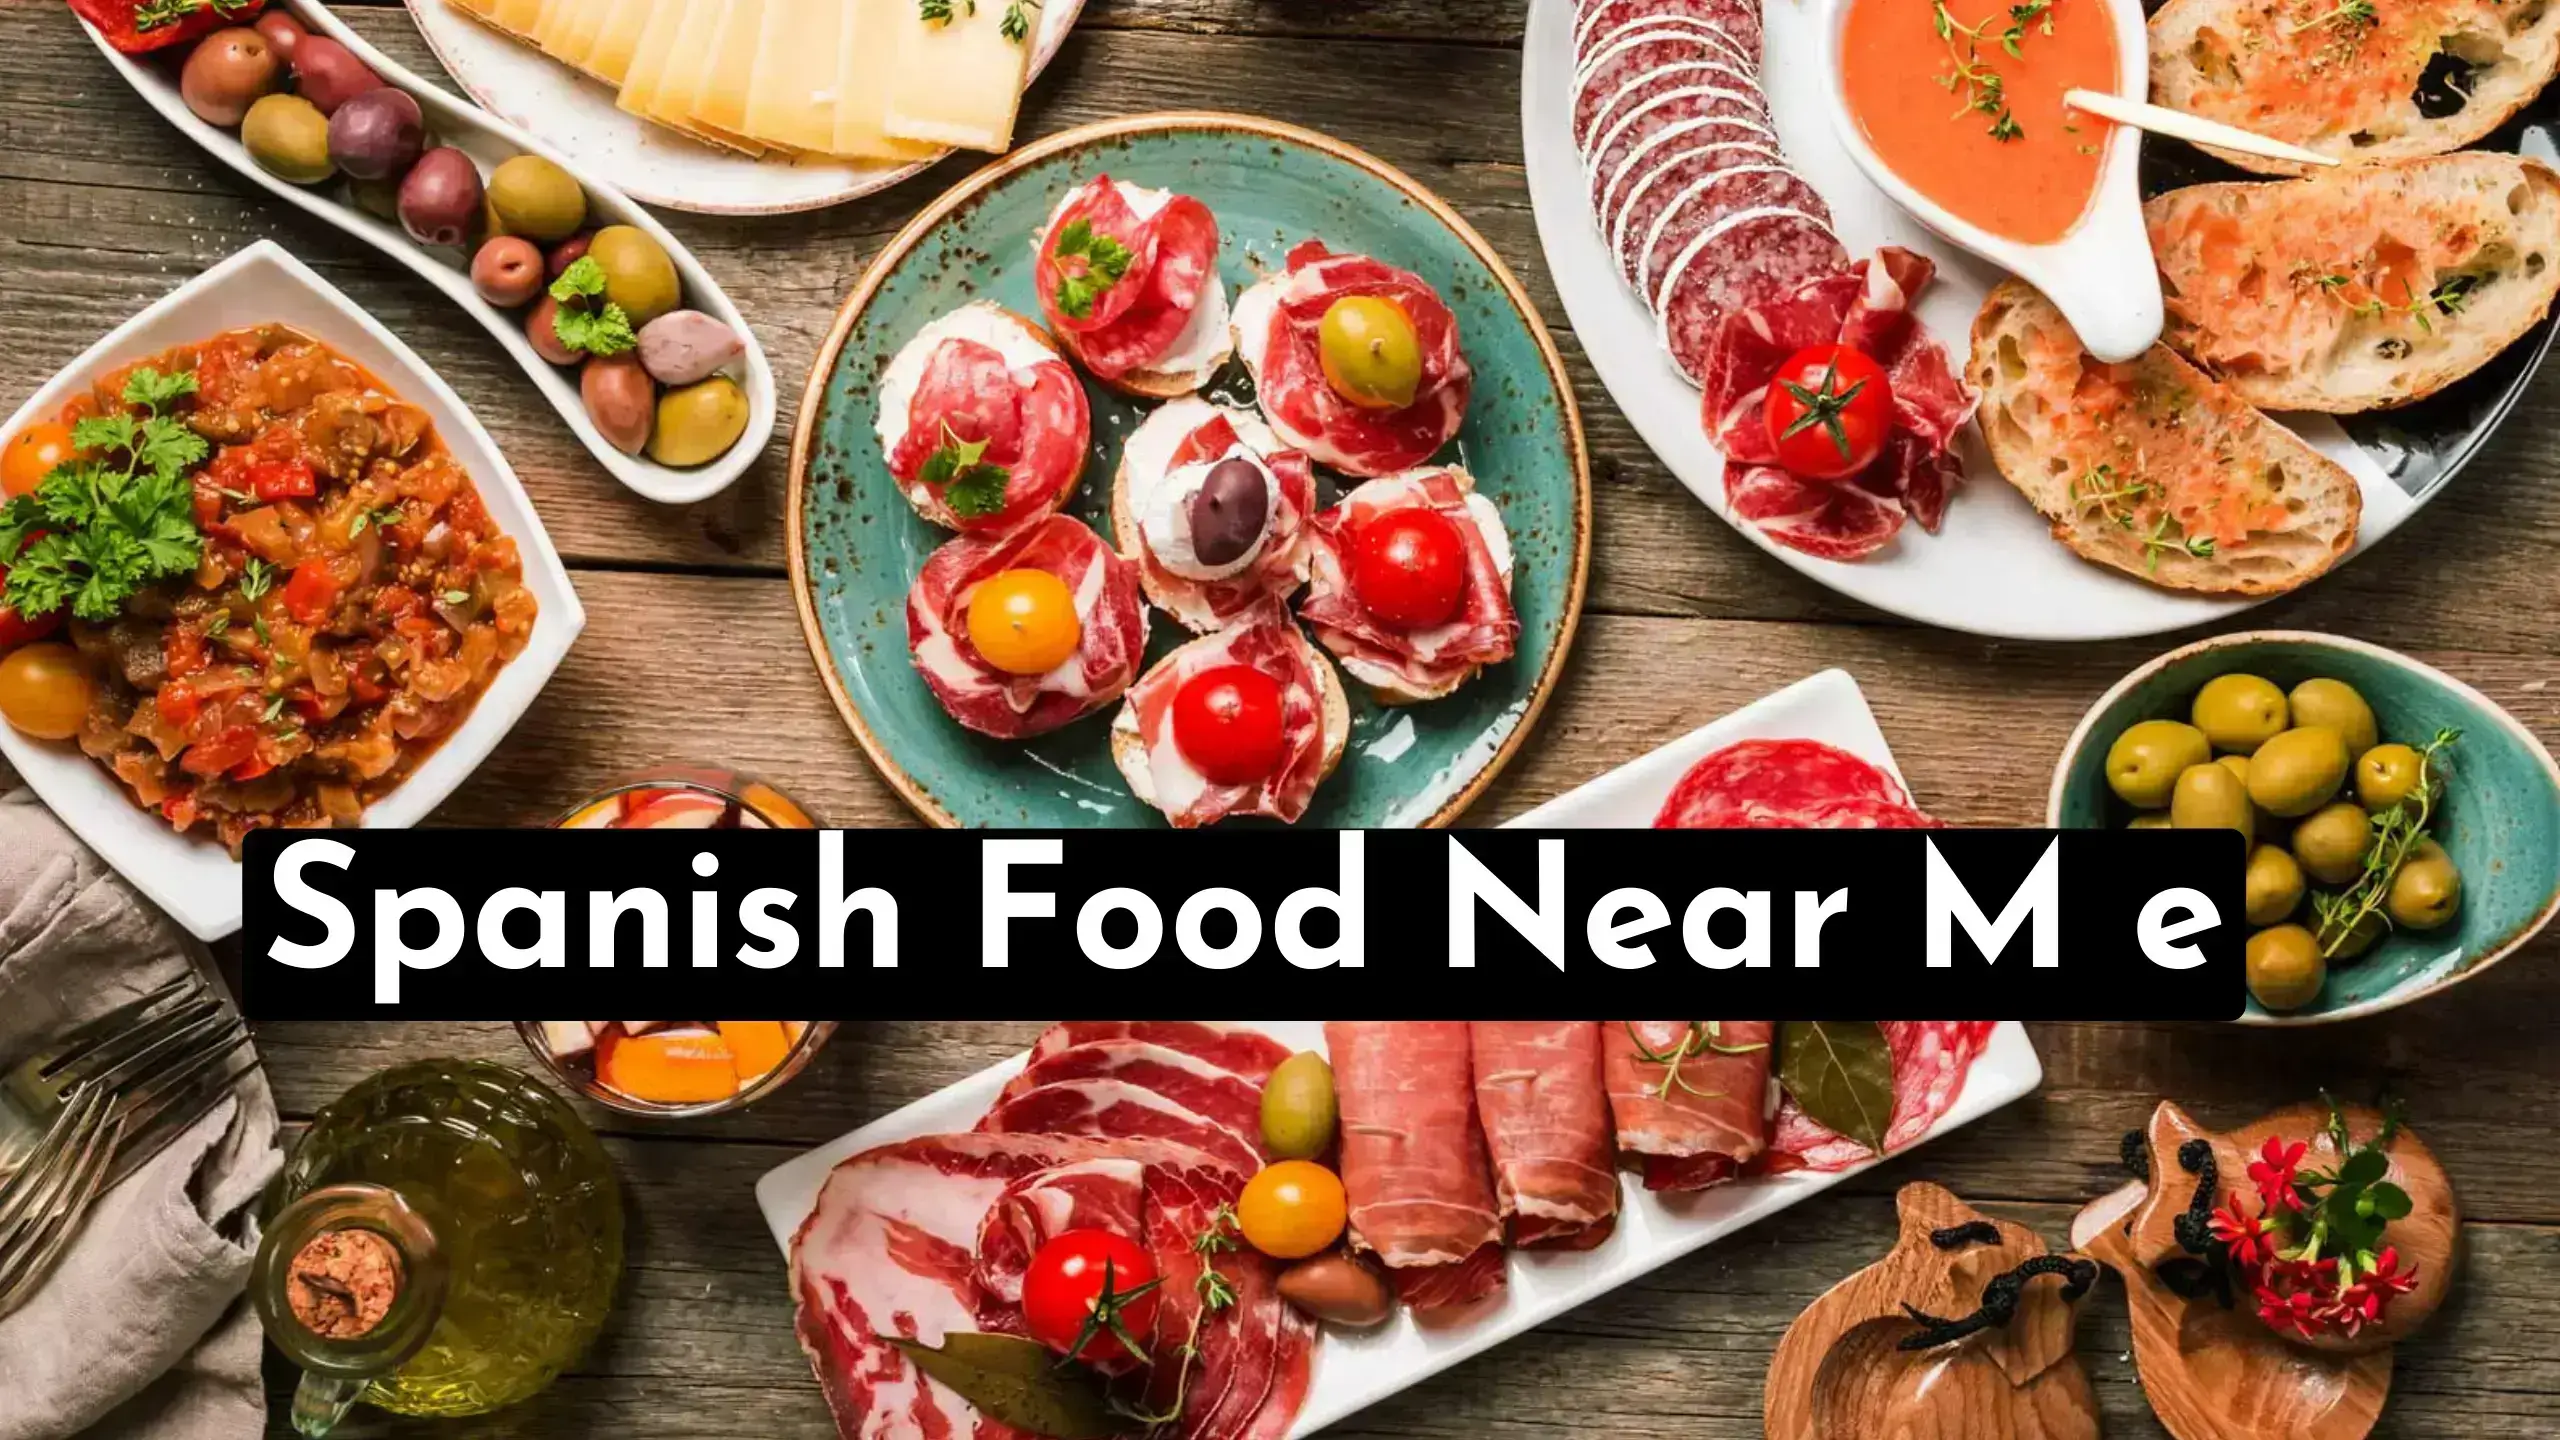 A Quick Guide To Find Spanish Food Near Me | Also Find Best Spanish Dishes, Restaurants, Tapas bars, Food Trucks & Online Delivery Services.